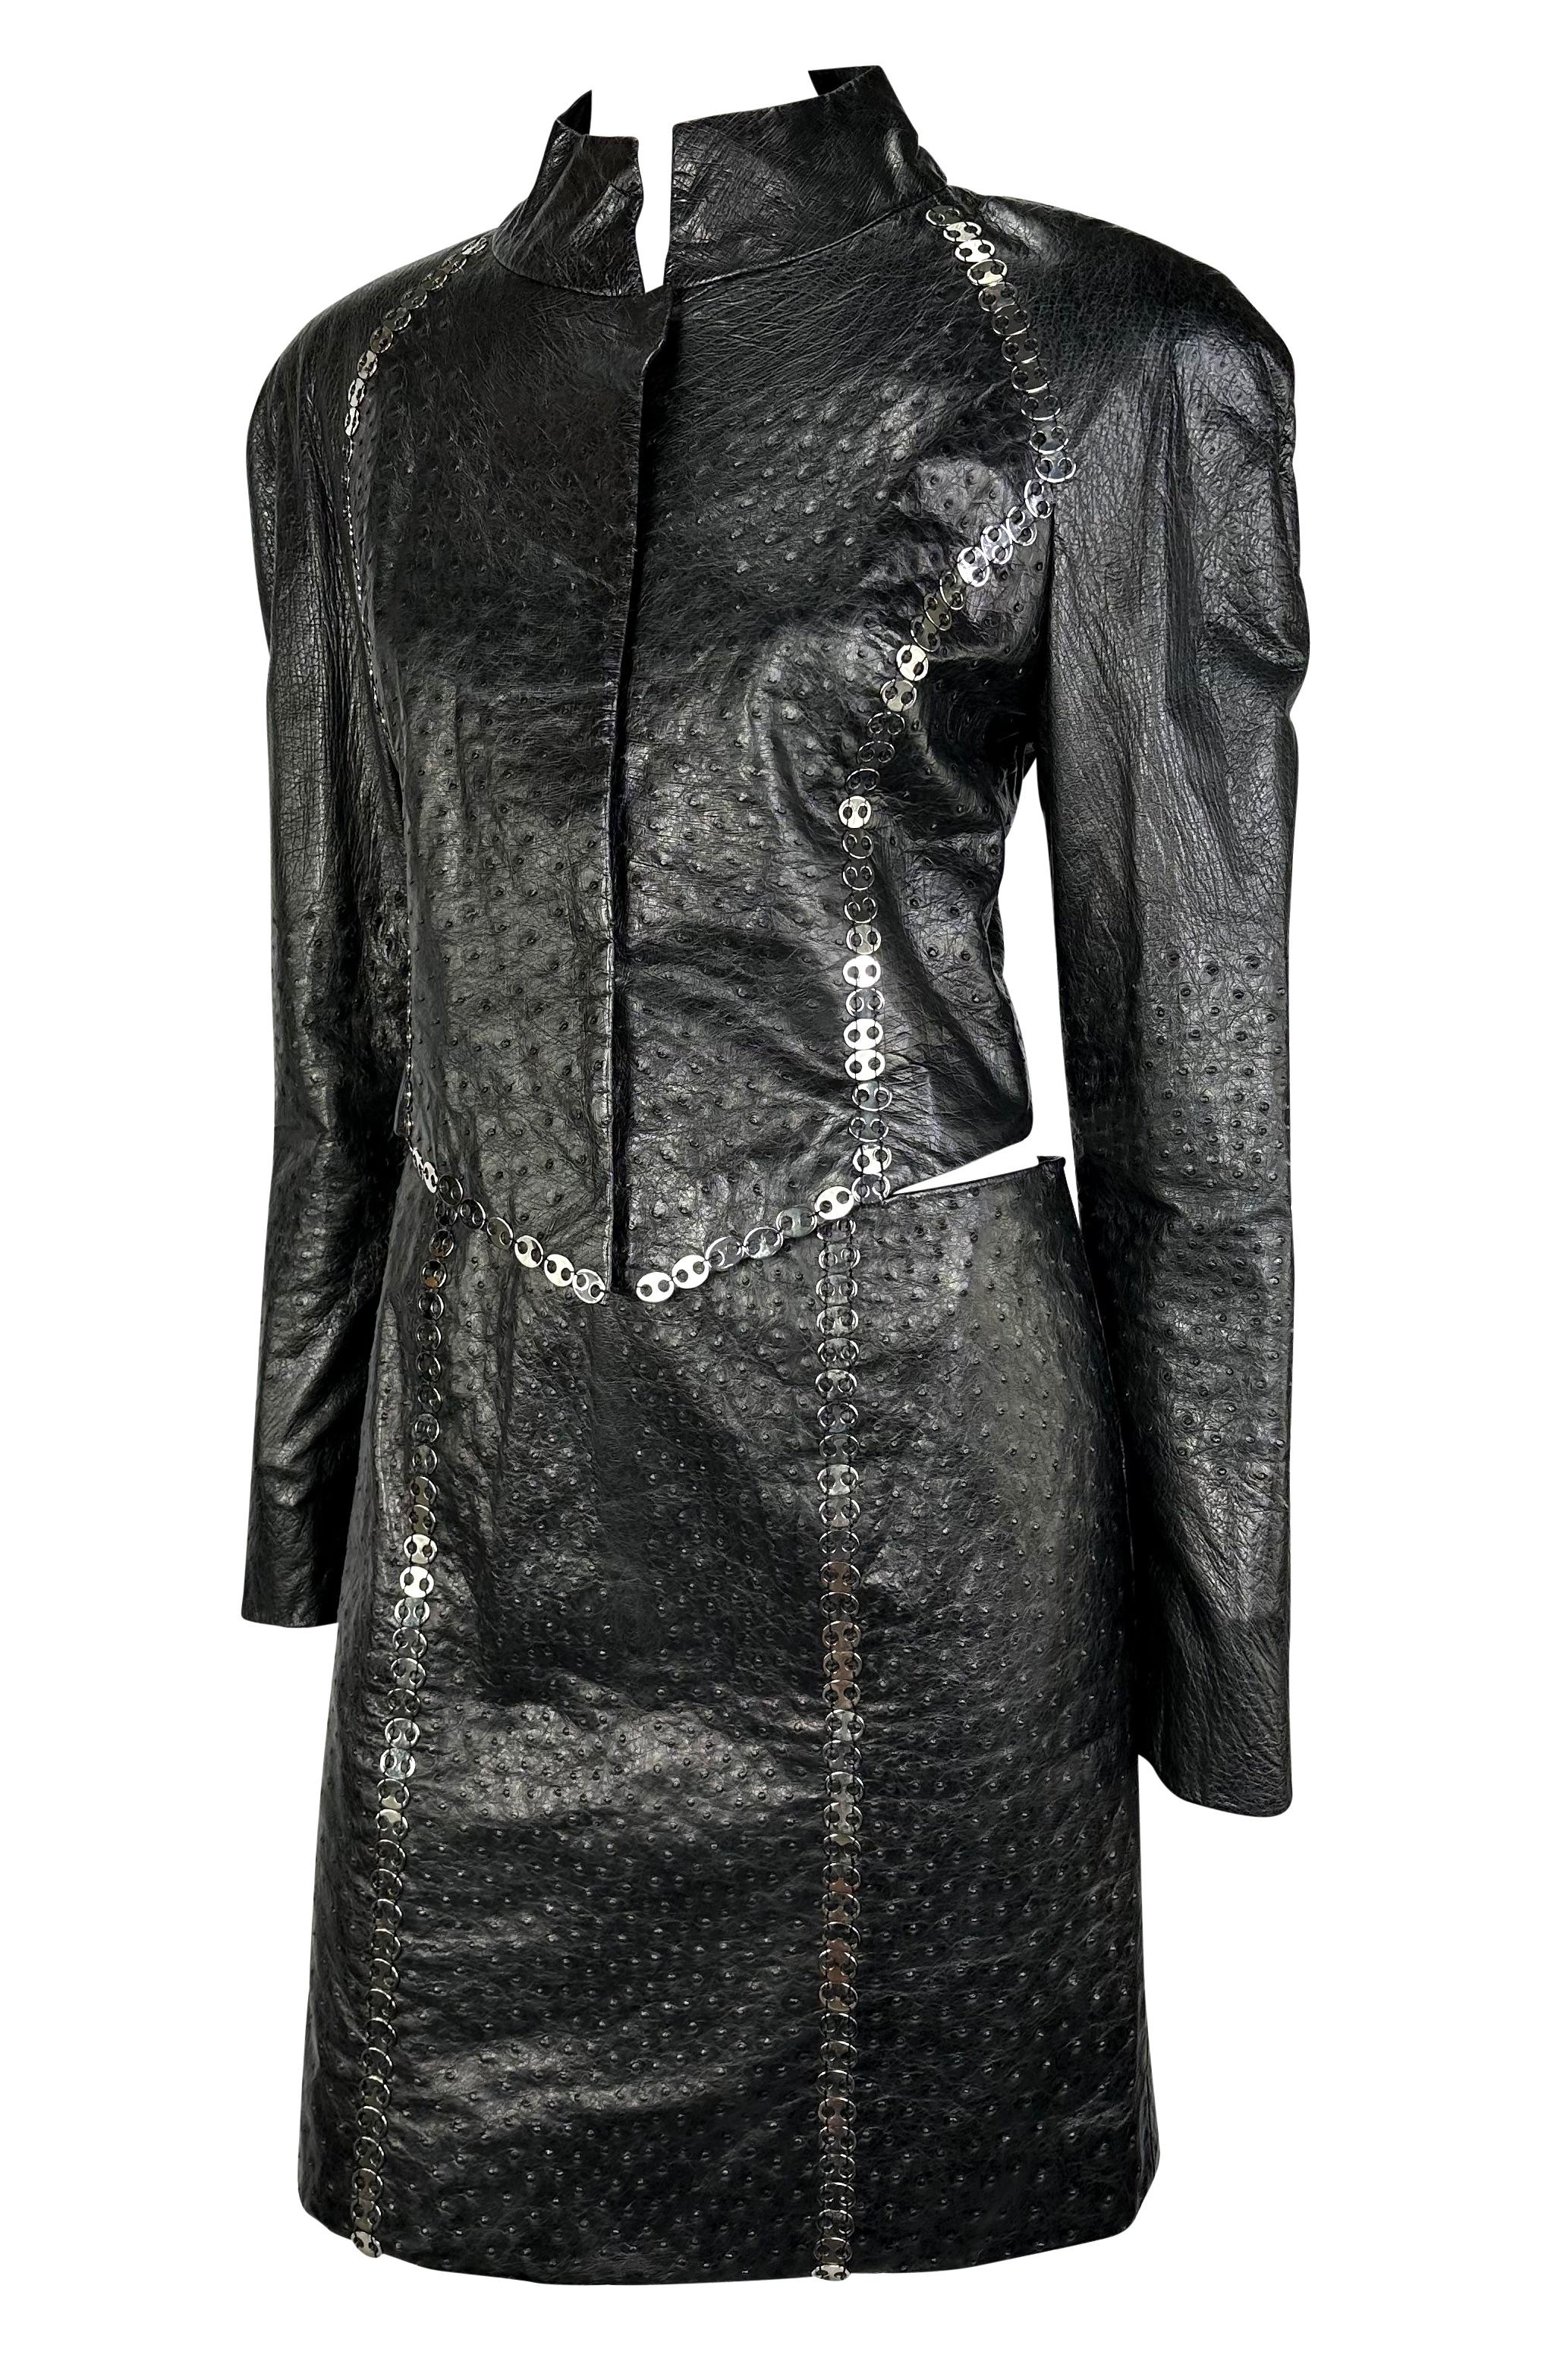 Presenting an incredible black ostrich leather Paco Rabanne Haute Couture skirt set. From the early 1990s, this stunning custom set is constructed entirely of black ostrich leather and is accented with silver Paco Rabanne silver-tone metal accents.